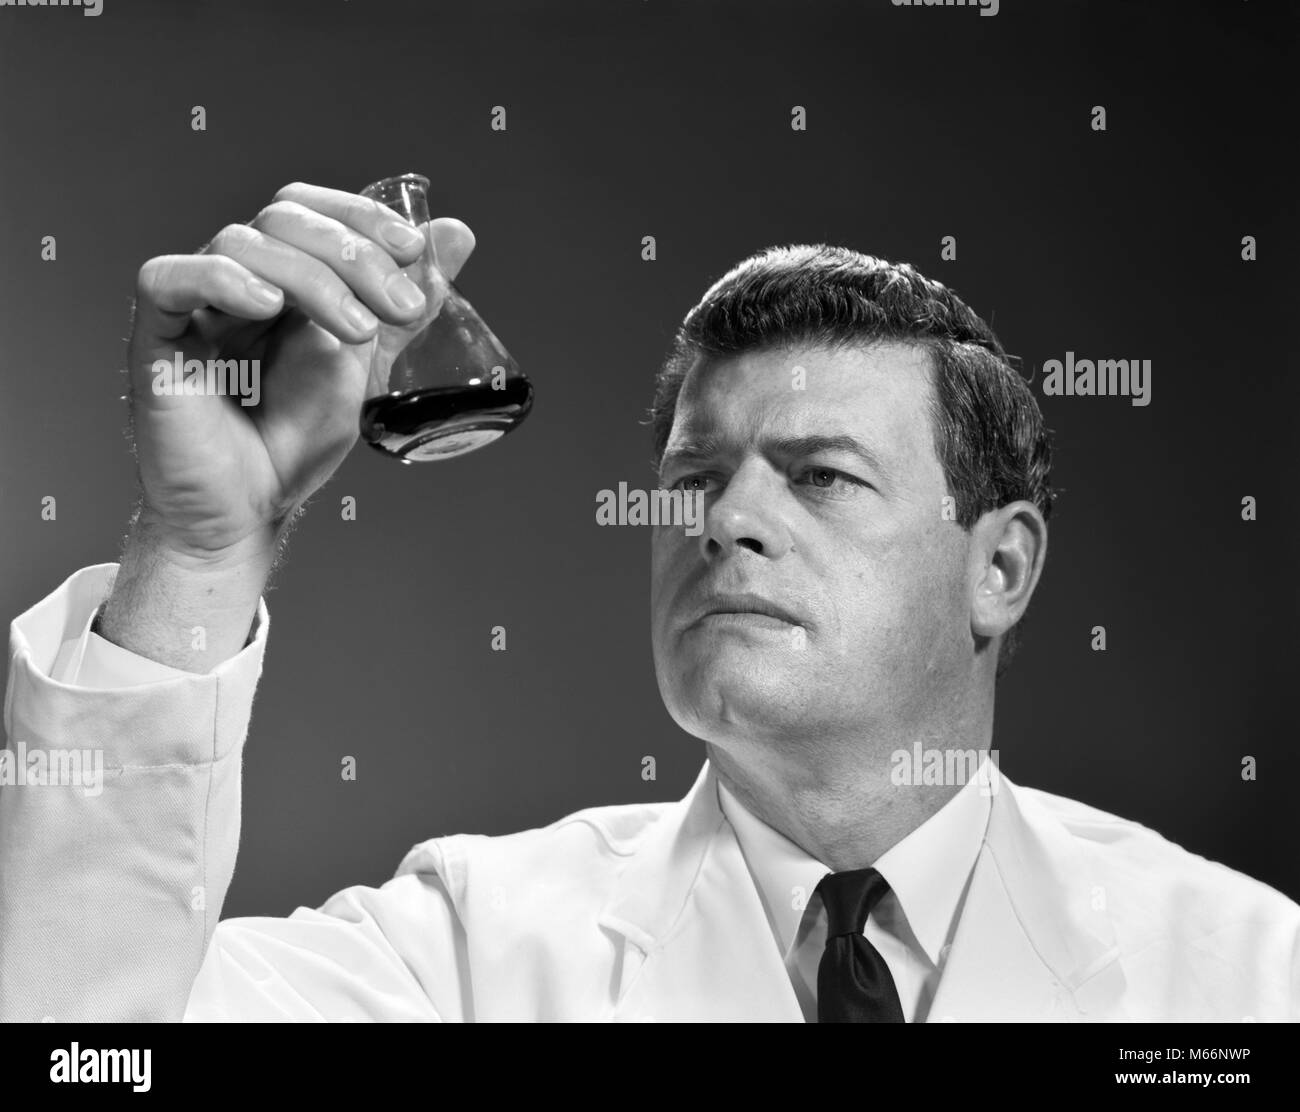 1960s 1970s MAN SCIENTIST HOLDING LOOKING AT GLASS BEAKER OF LIQUID - l2492 HAR001 HARS OCCUPATION HEAD AND SHOULDERS CHEMICAL DISCOVERY CHEMIST SCIENTIFIC BEAKER KNOWLEDGE PHARMACEUTICAL PROGRESS INNOVATION HIGH TECH RESEARCHING SOLUTIONS FLASK MALES MID-ADULT MID-ADULT MAN TEST TUBE B&W BLACK AND WHITE CAUCASIAN ETHNICITY OCCUPATIONS OLD FASHIONED PERSONS Stock Photo